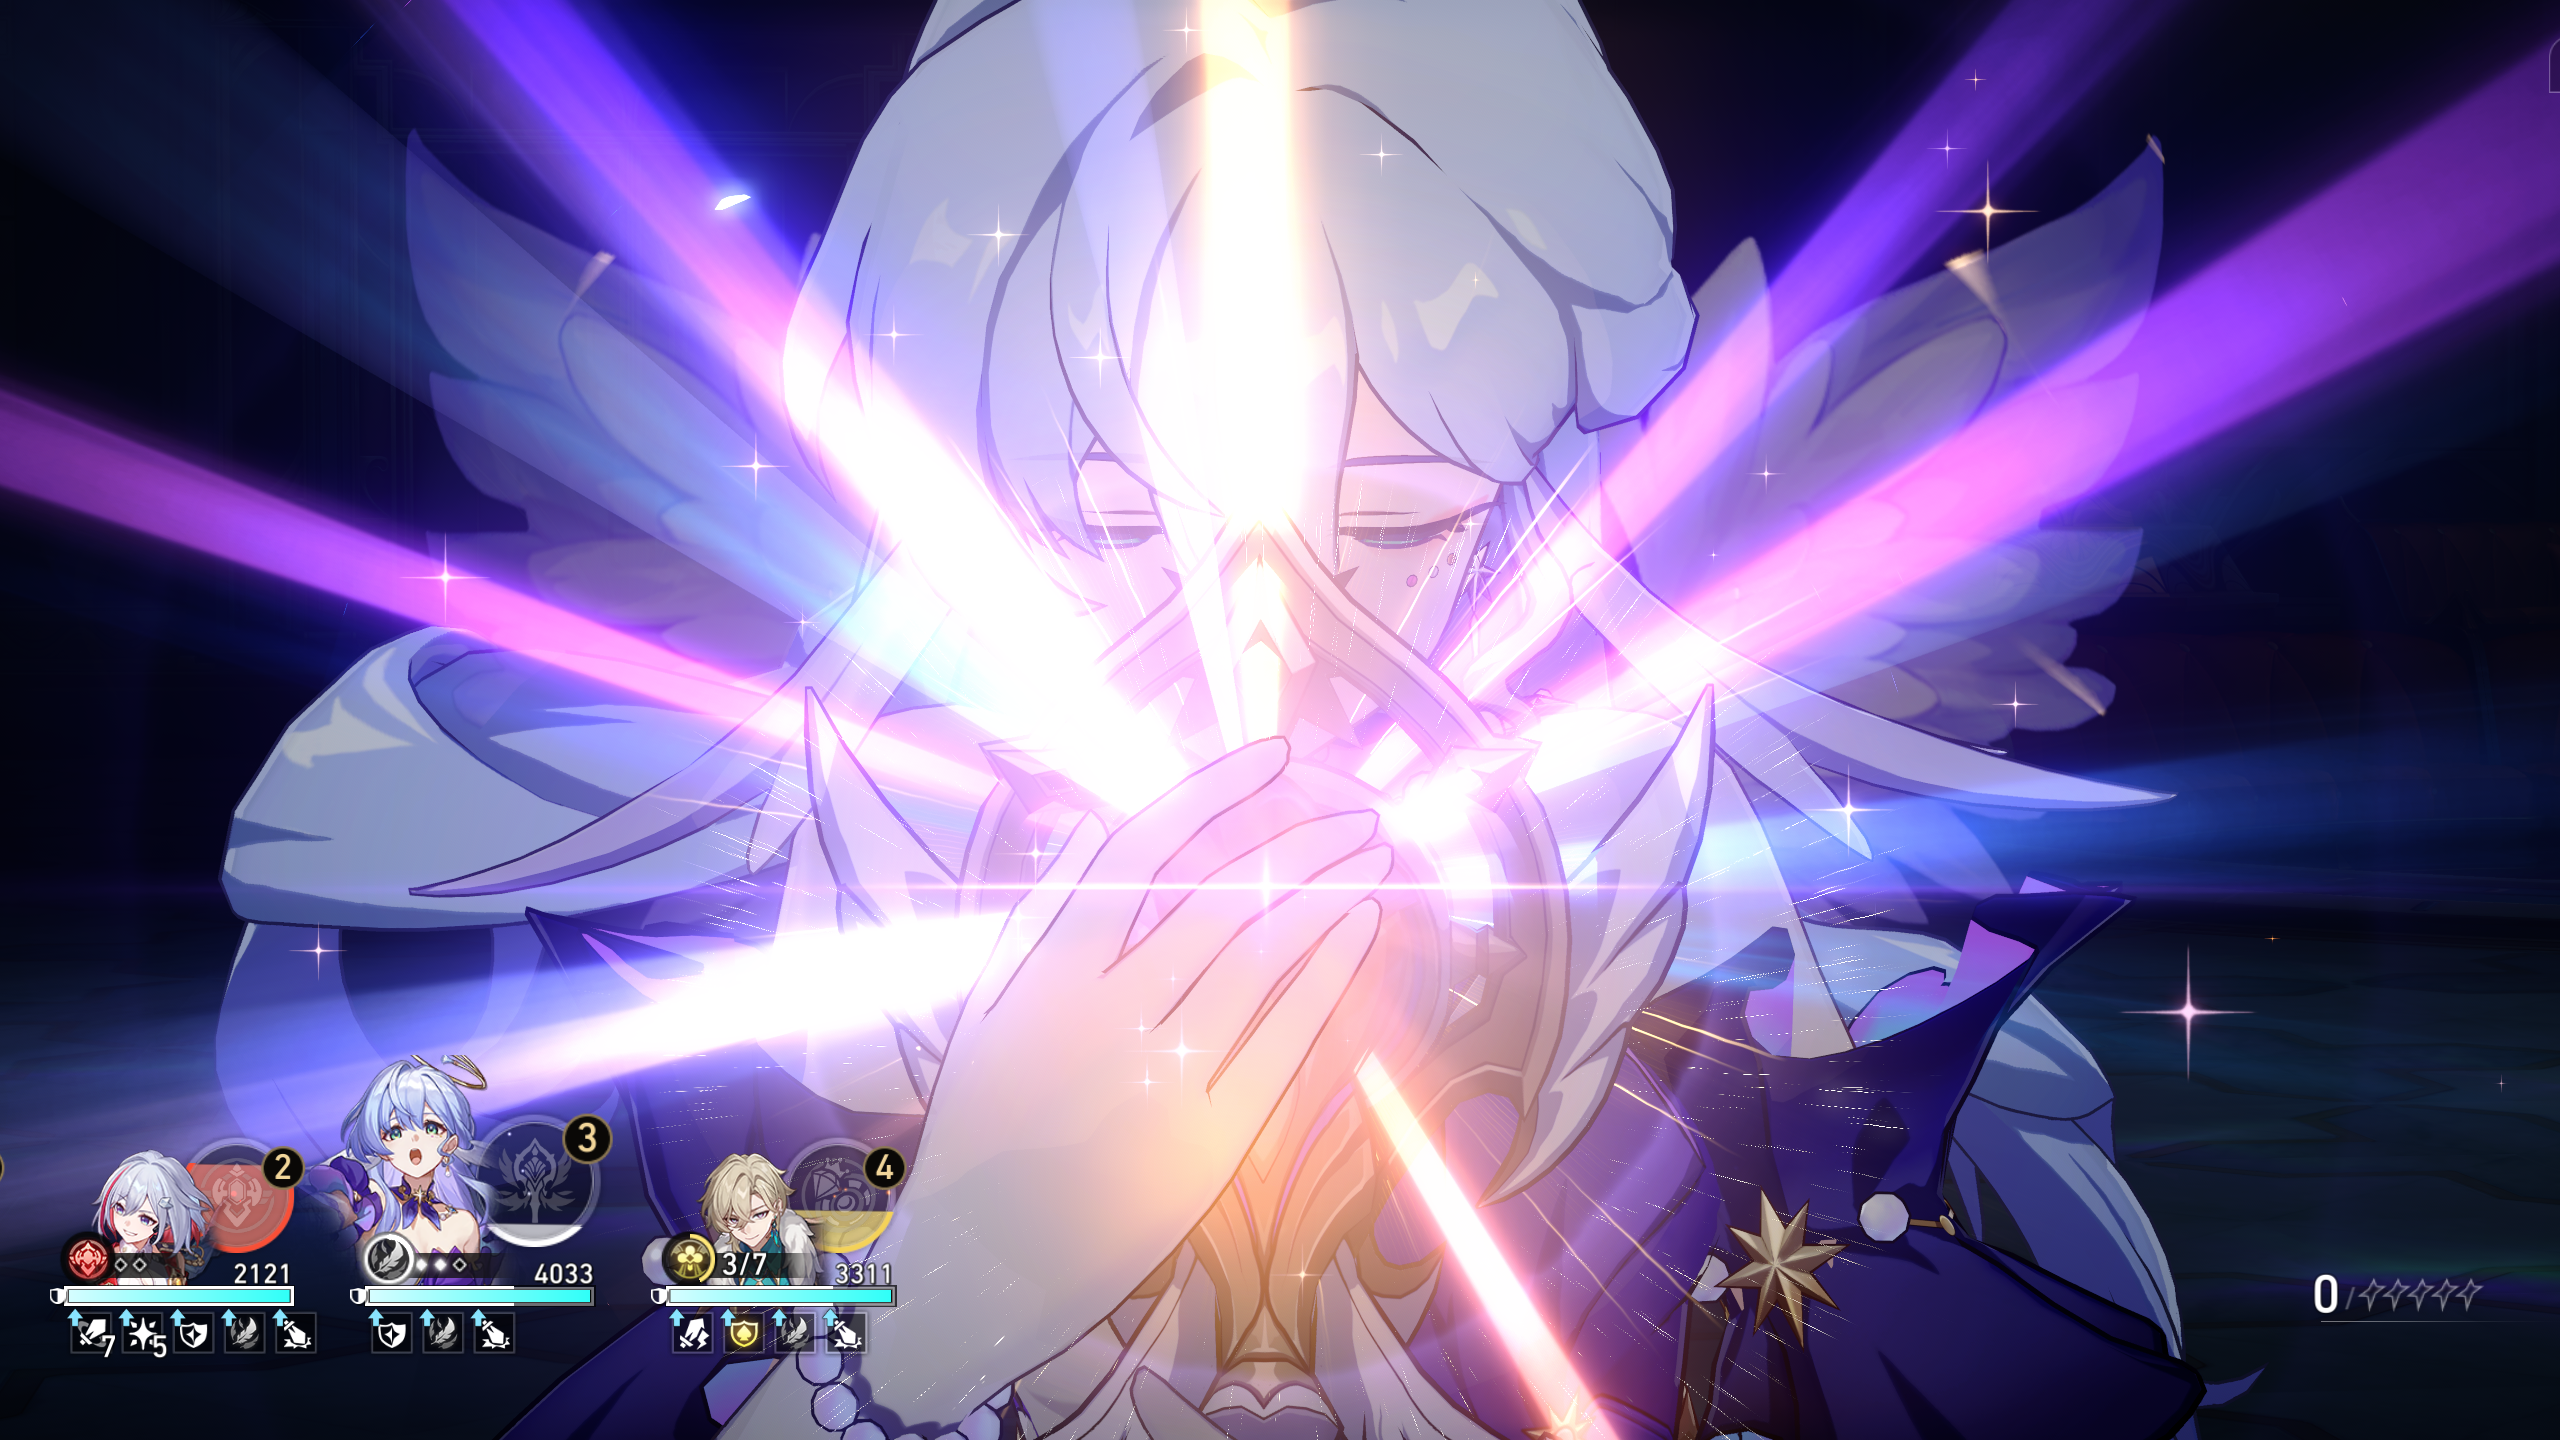 An image of Robin with crepuscular rays emanating from her hands in a still from Honkai: Star Rail for an article on how to build the character.